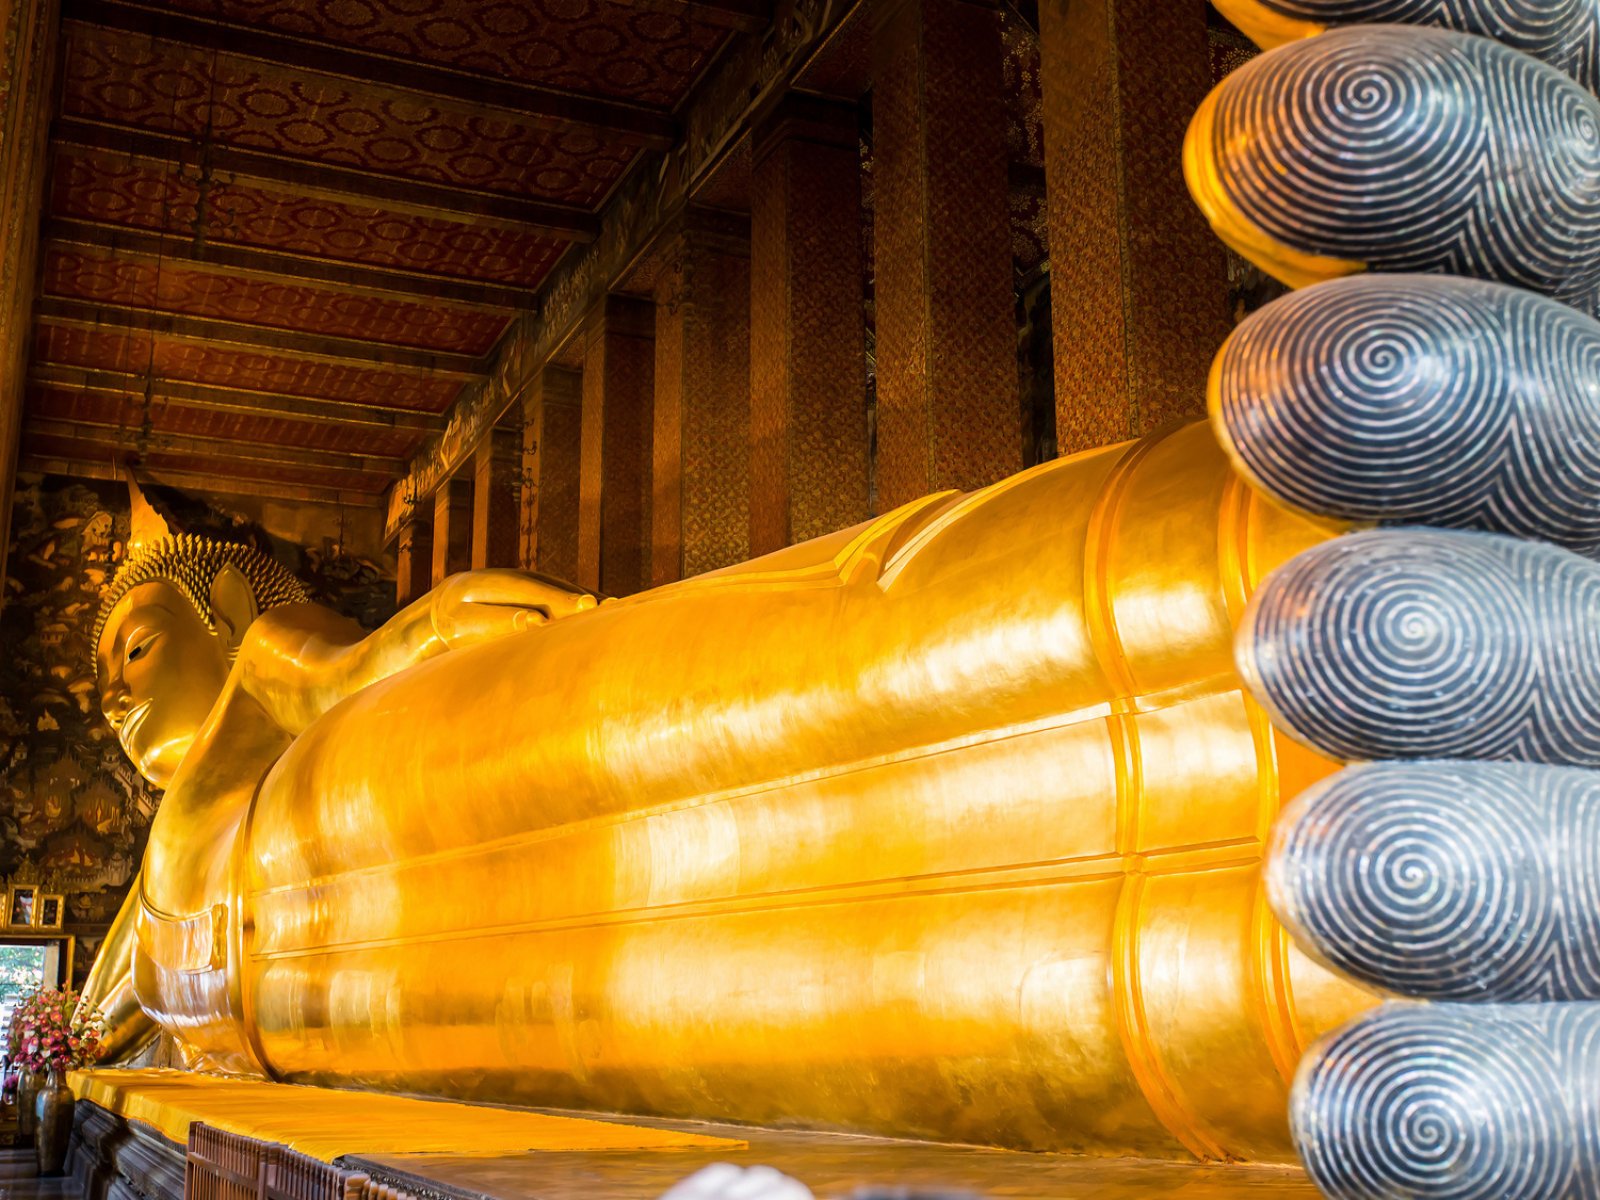 How to make a wish at the Temple of the Reclining Buddha in Bangkok